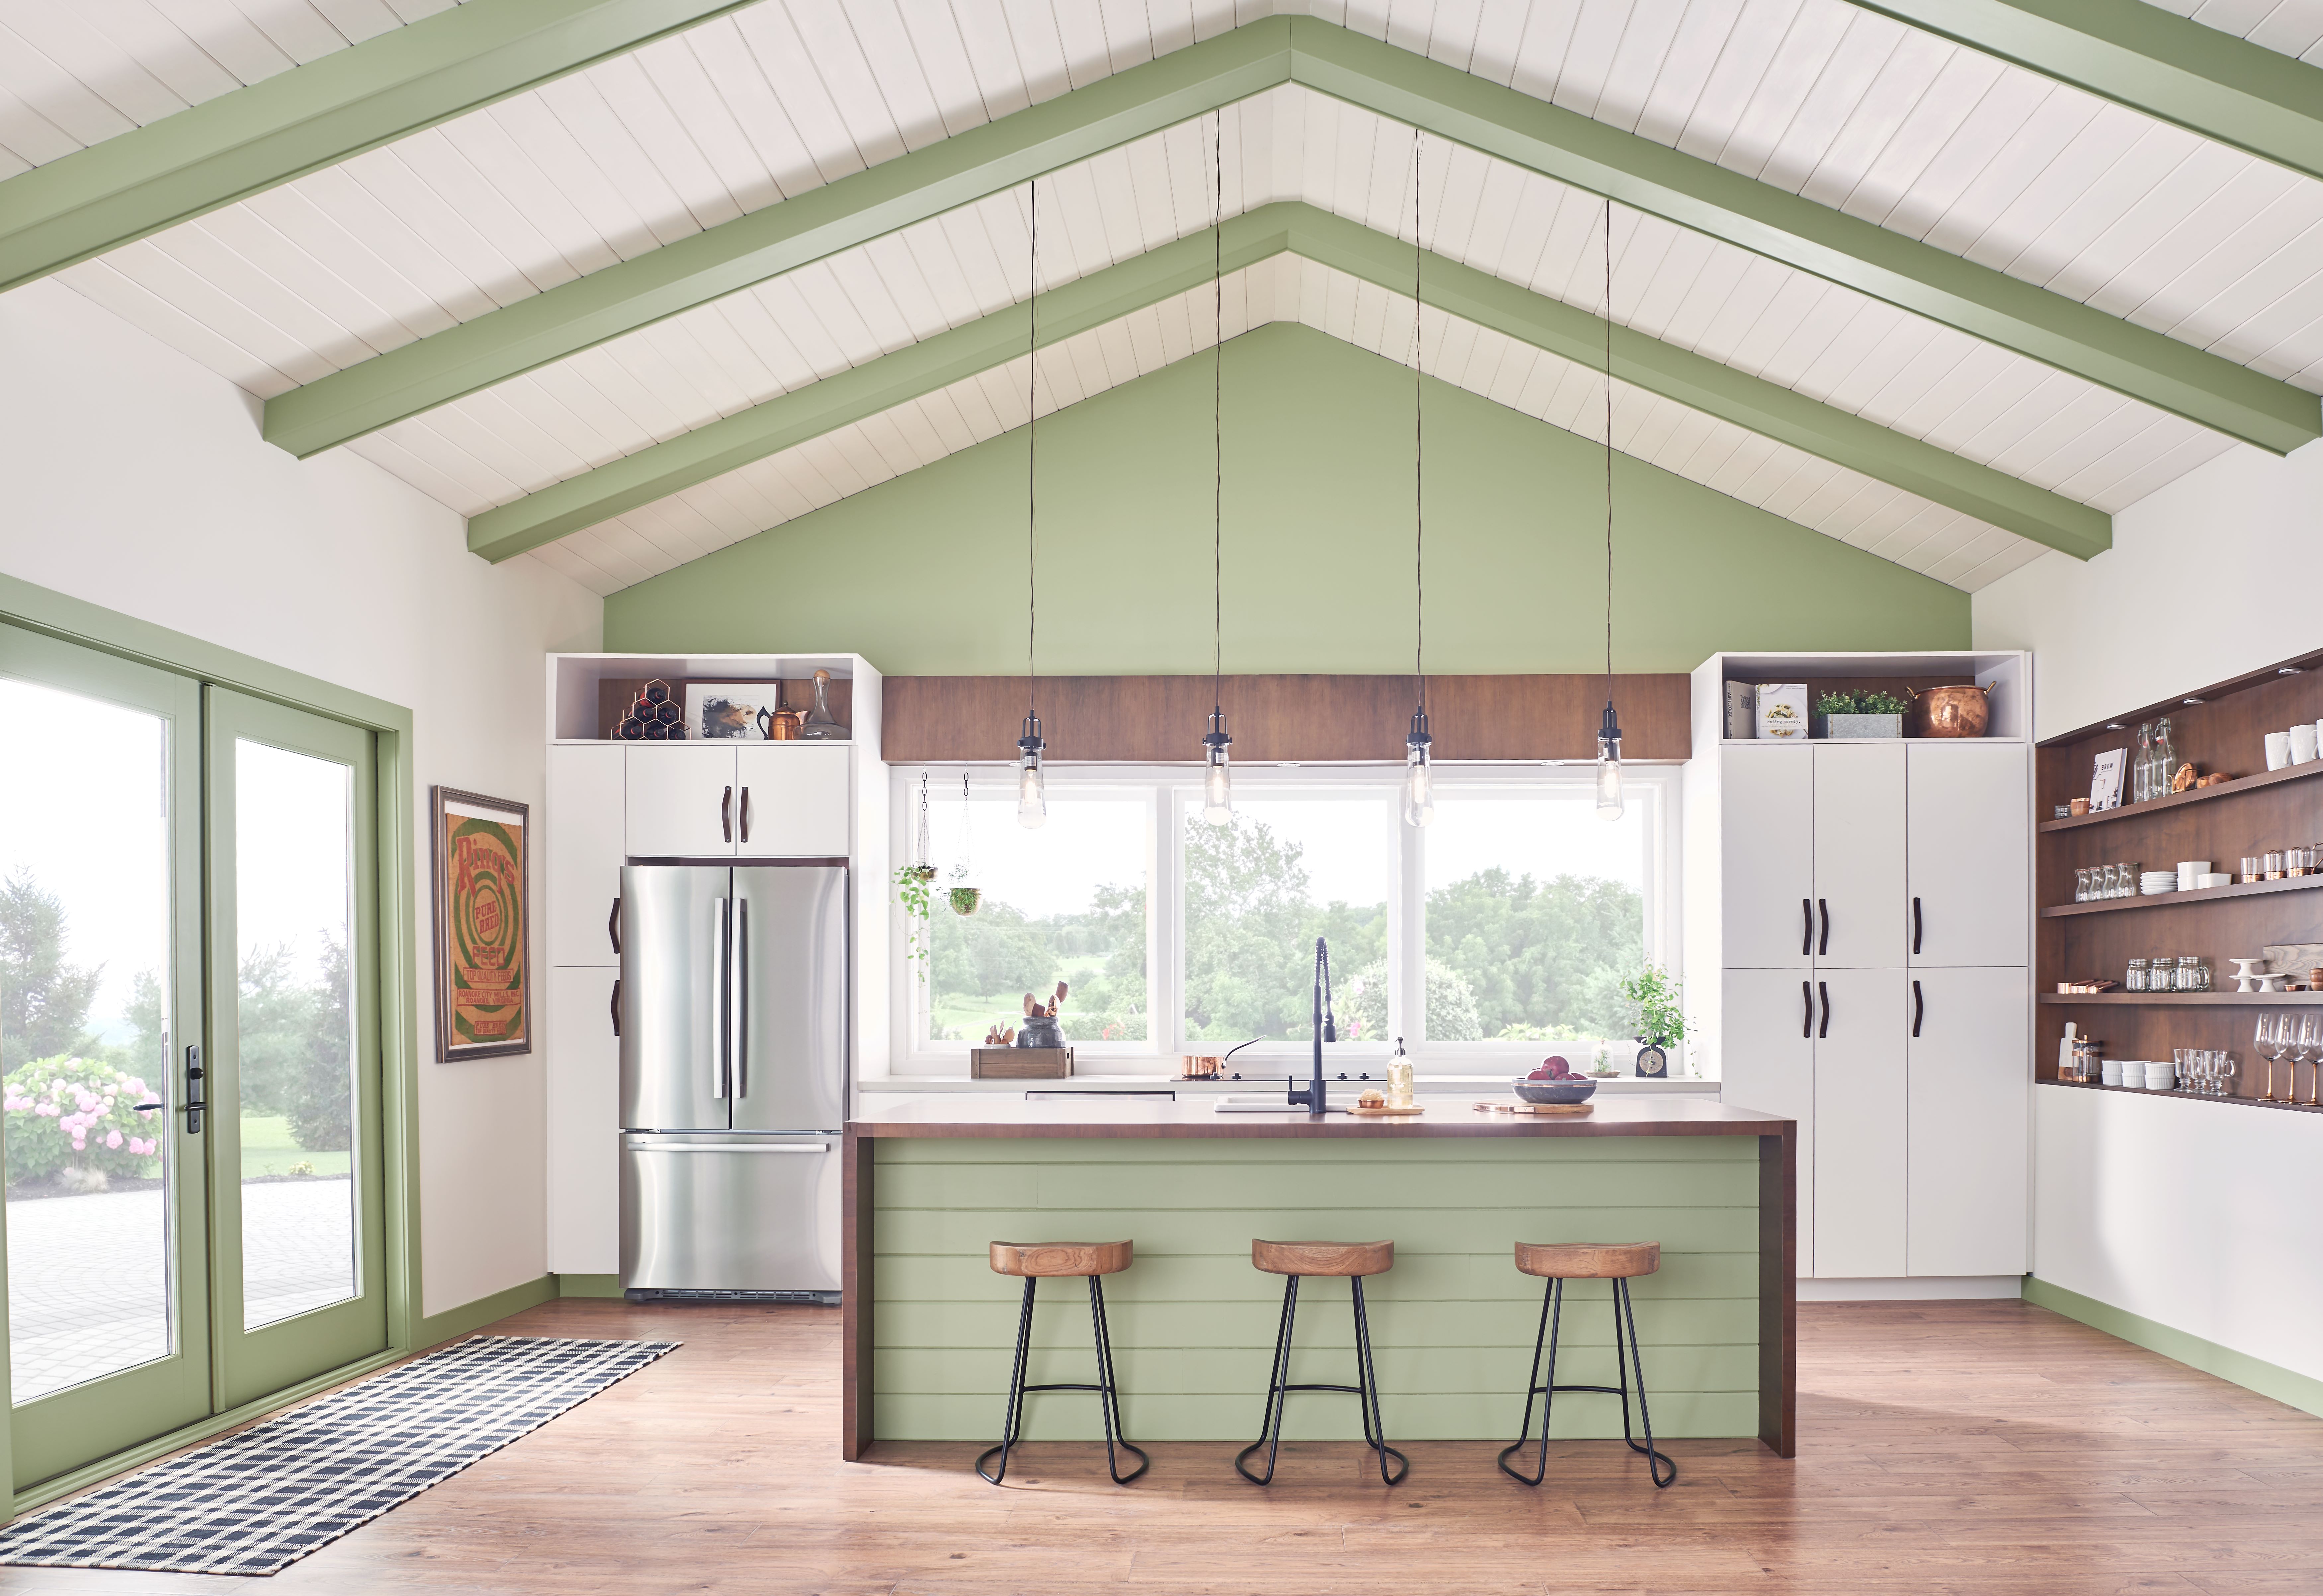 Residential kitchen with vaulted ceiling